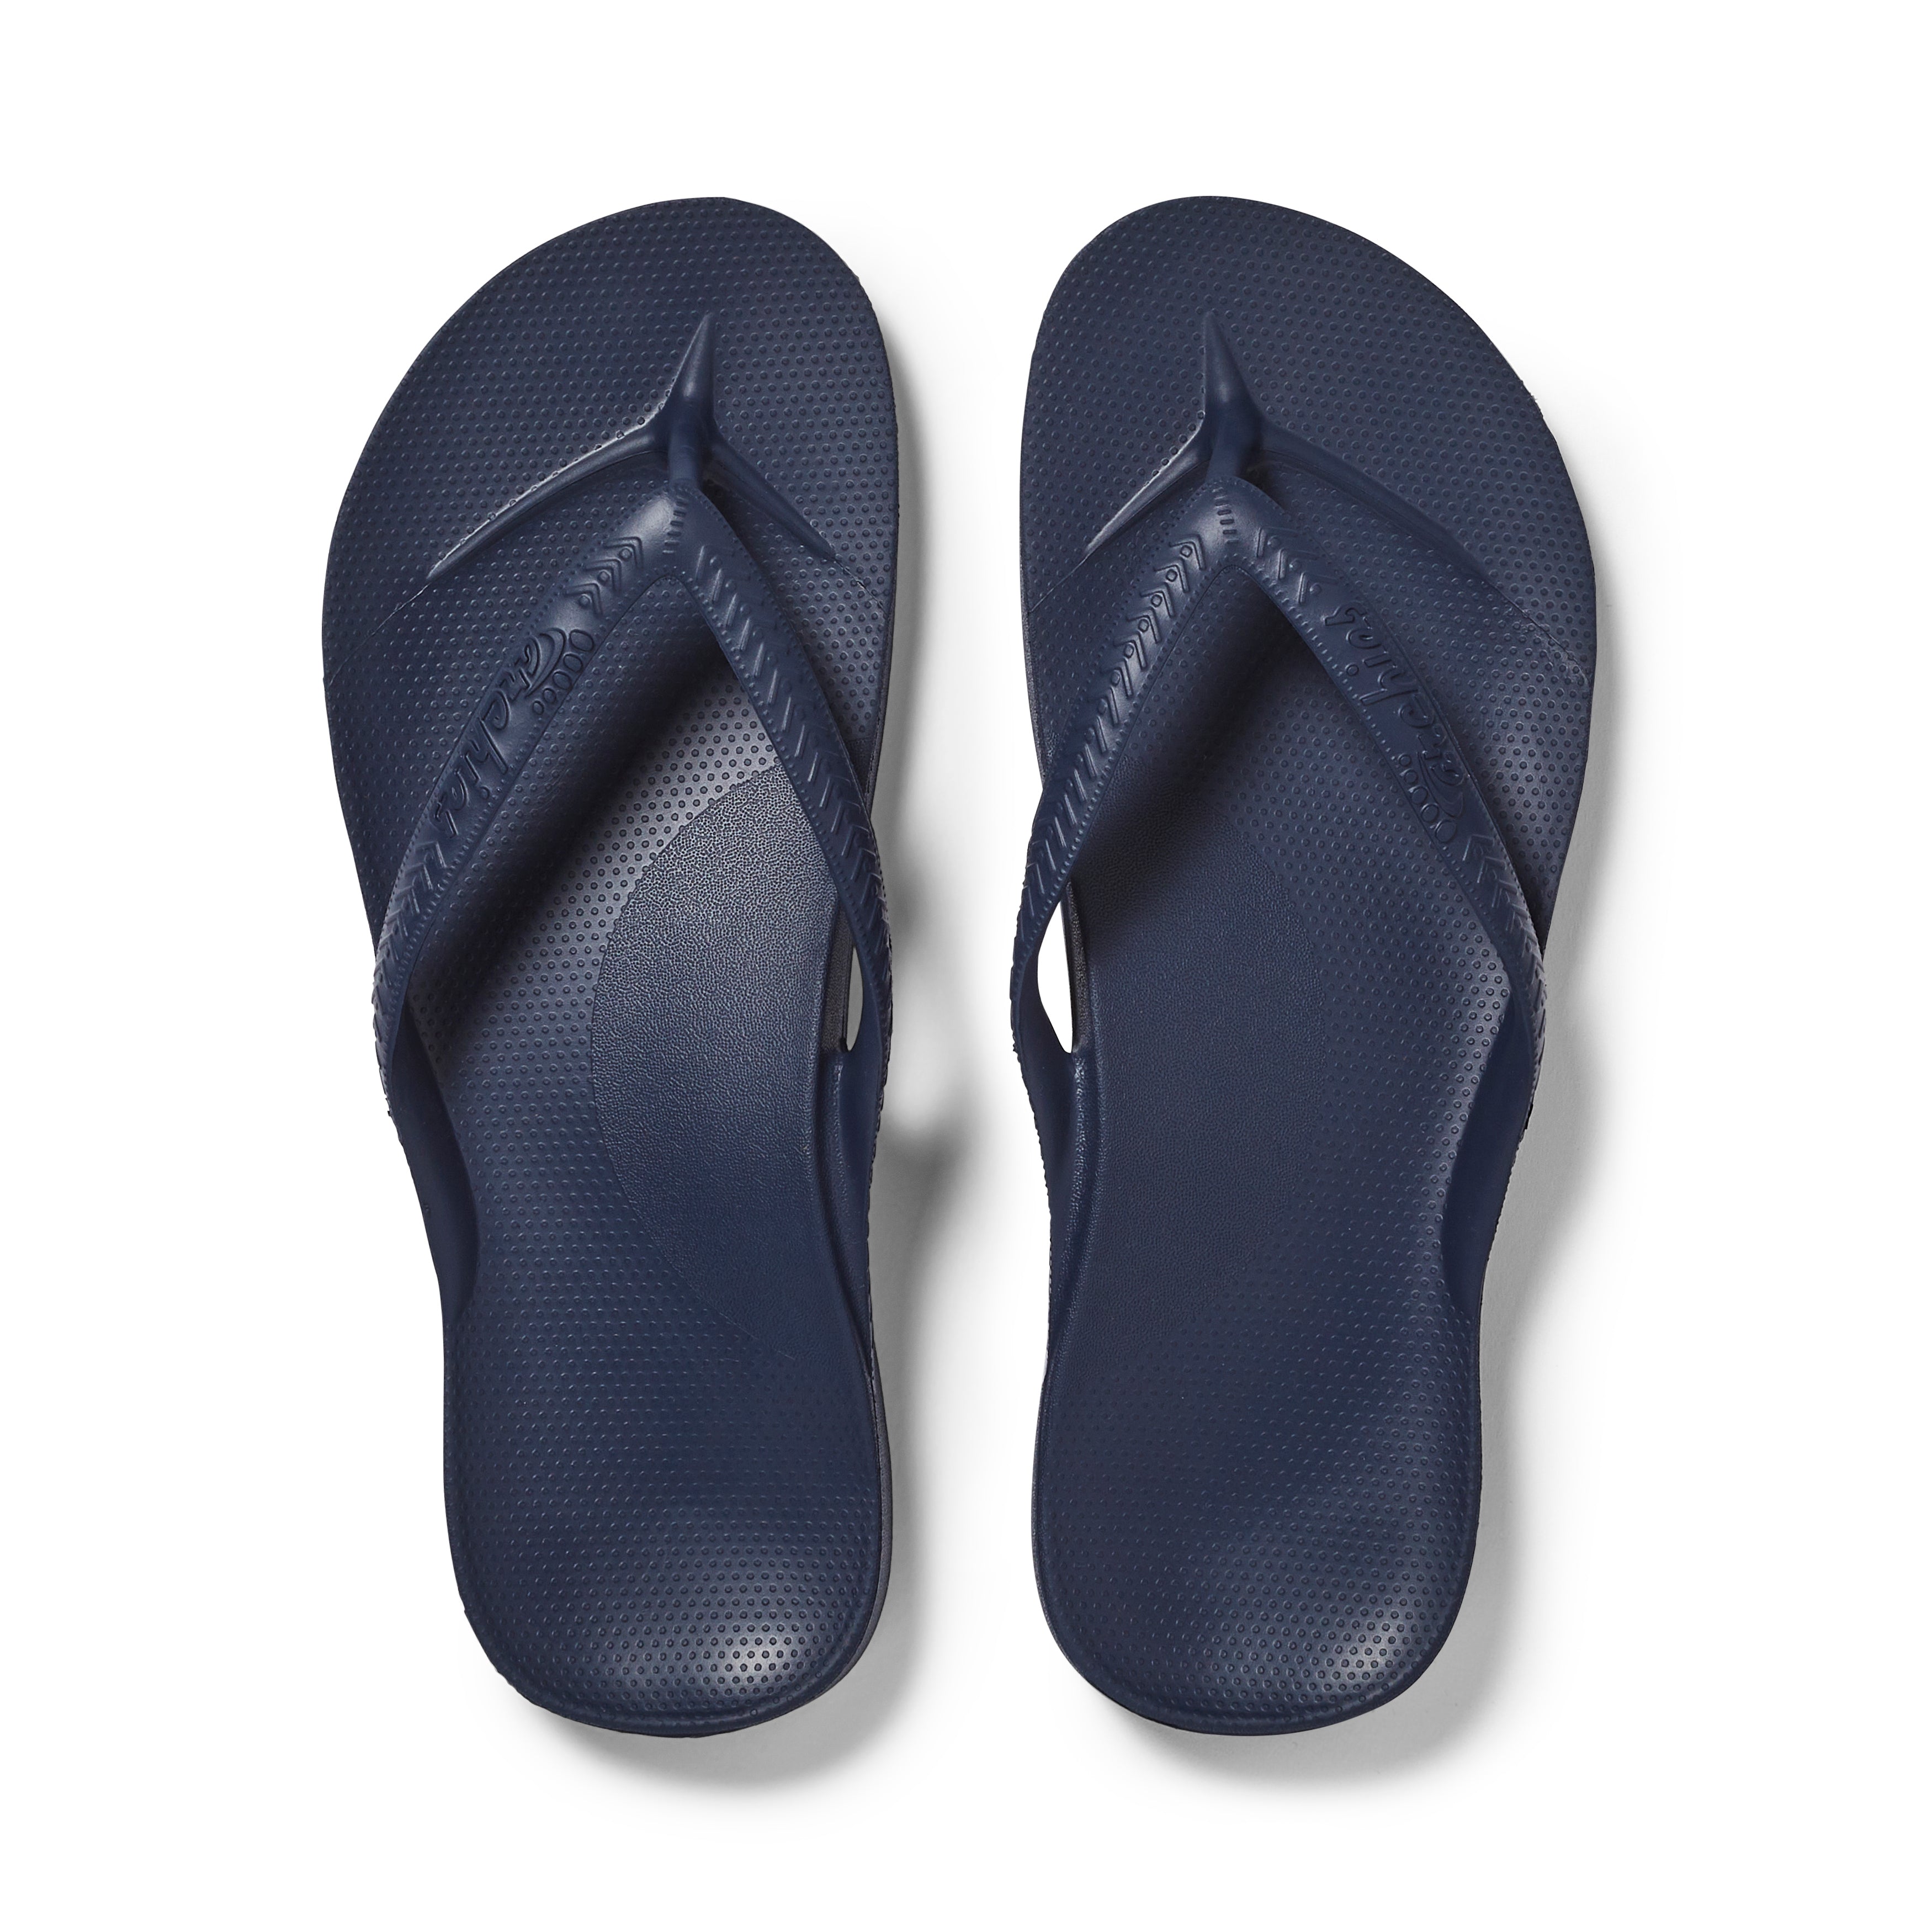 ARCHIES Footwear - Flip Flop SandalsOffering Great Arch Support And Comfort  - Taupe